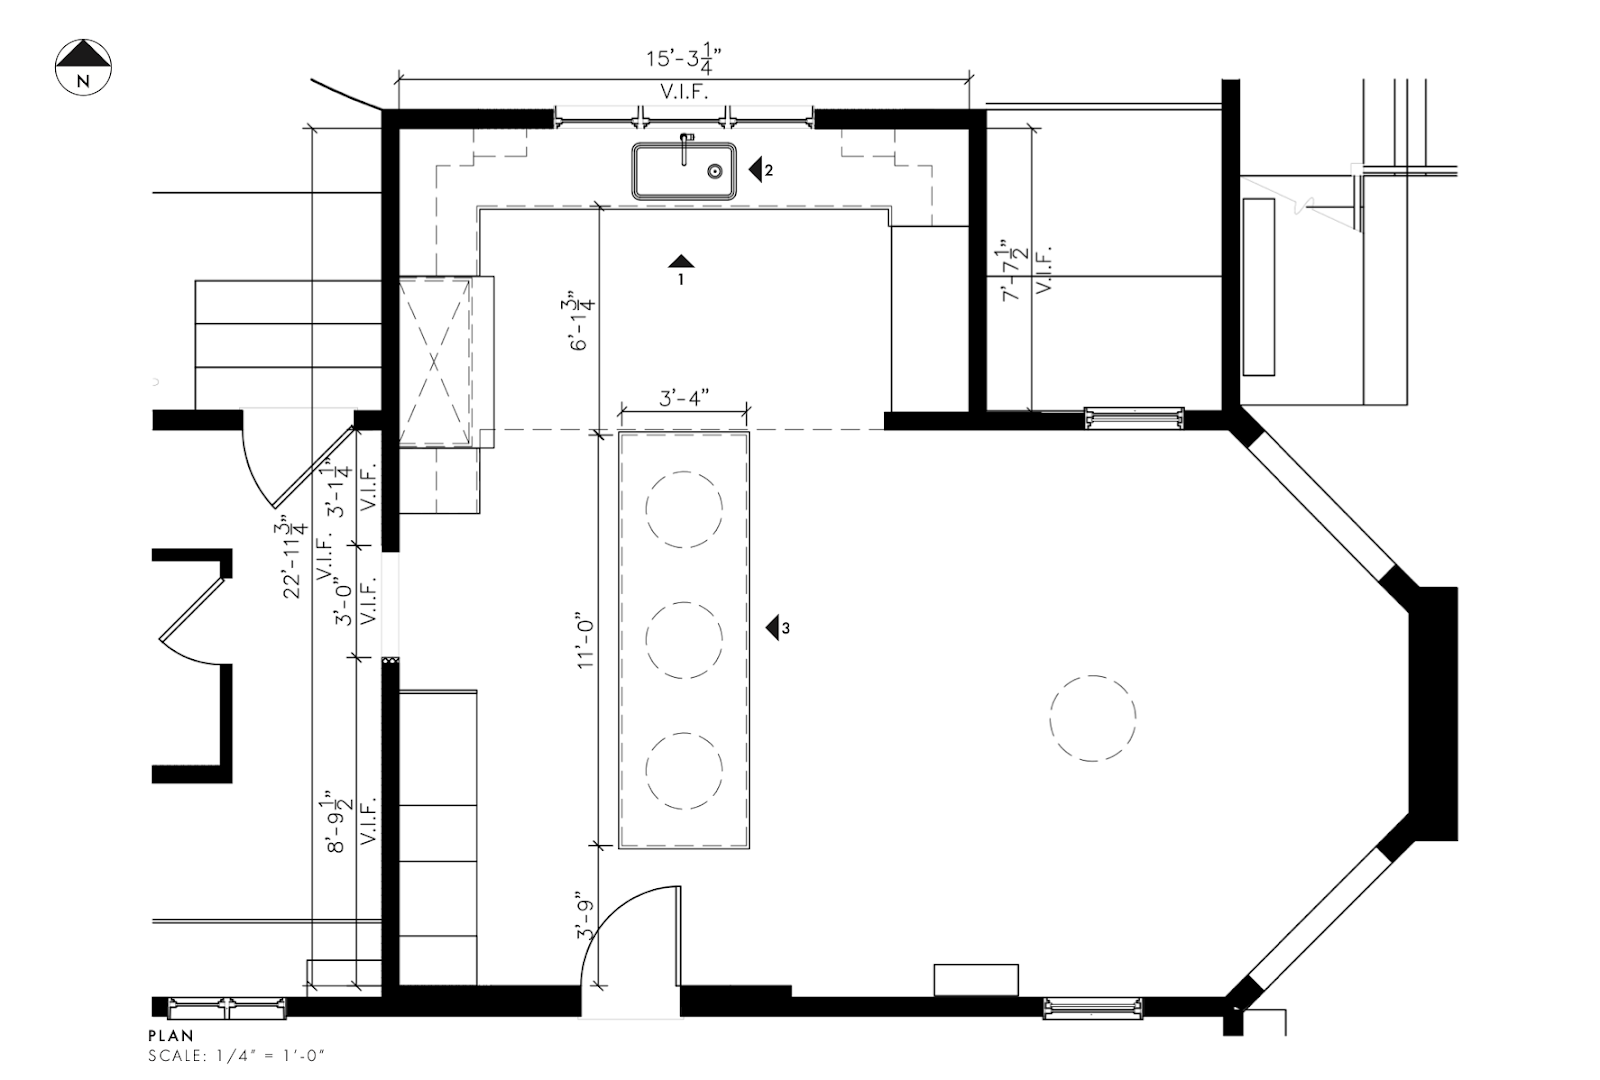 kitchen-floor-plan-drawing-with-center-island-cabinets-and-sink-and-dining-space